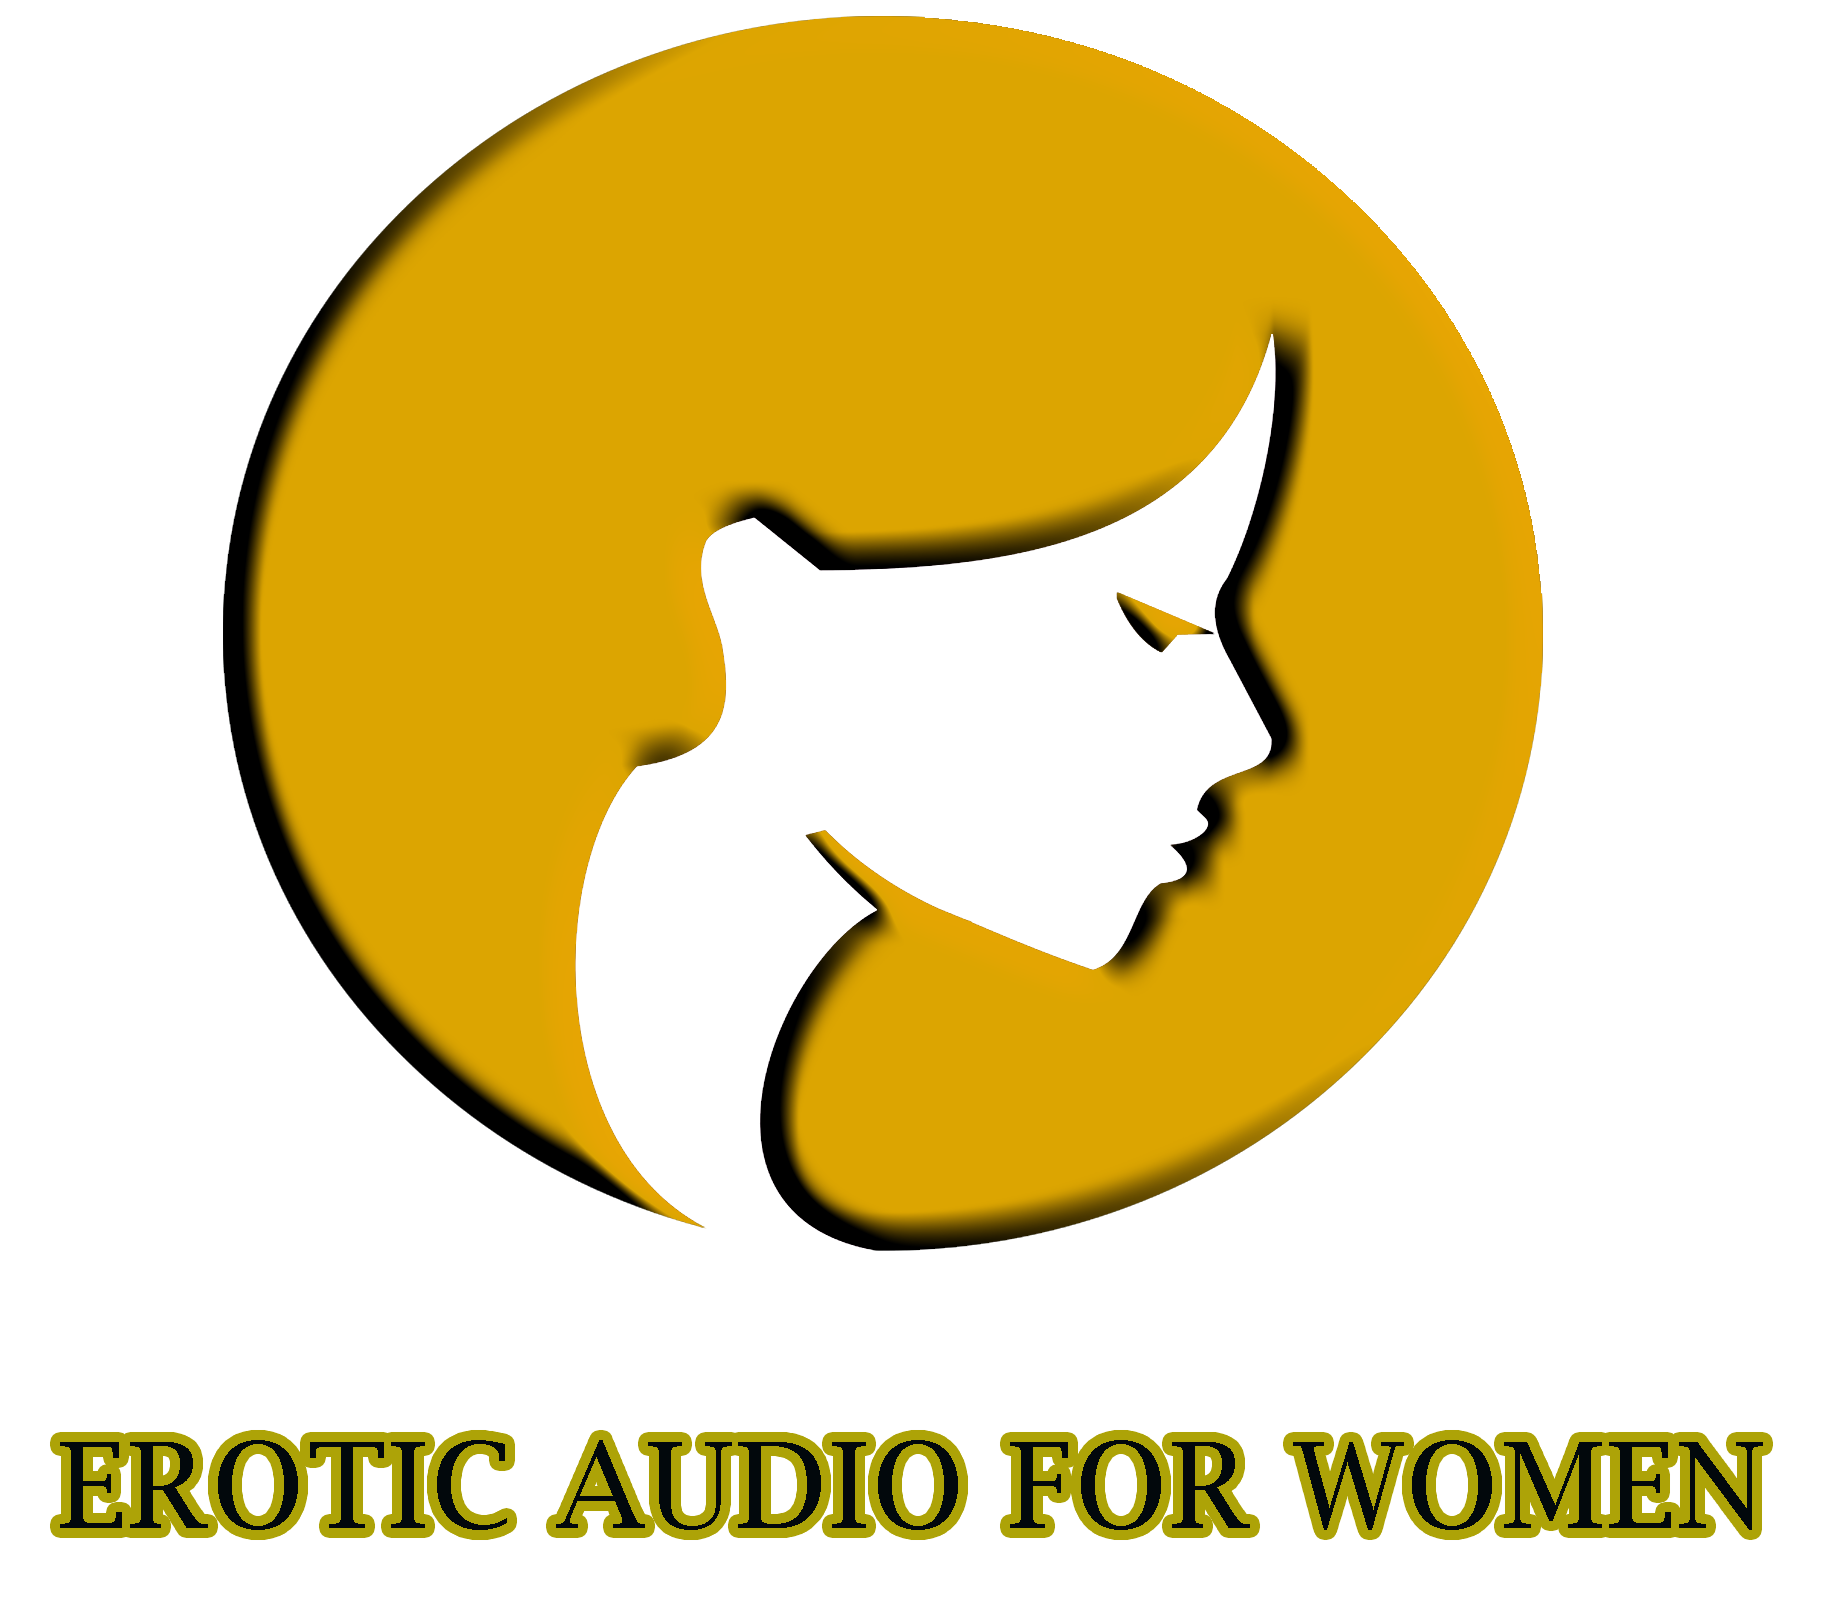 Erotic Audio For Women – NSFW and SFW Erotic Audios and Videos For Women.